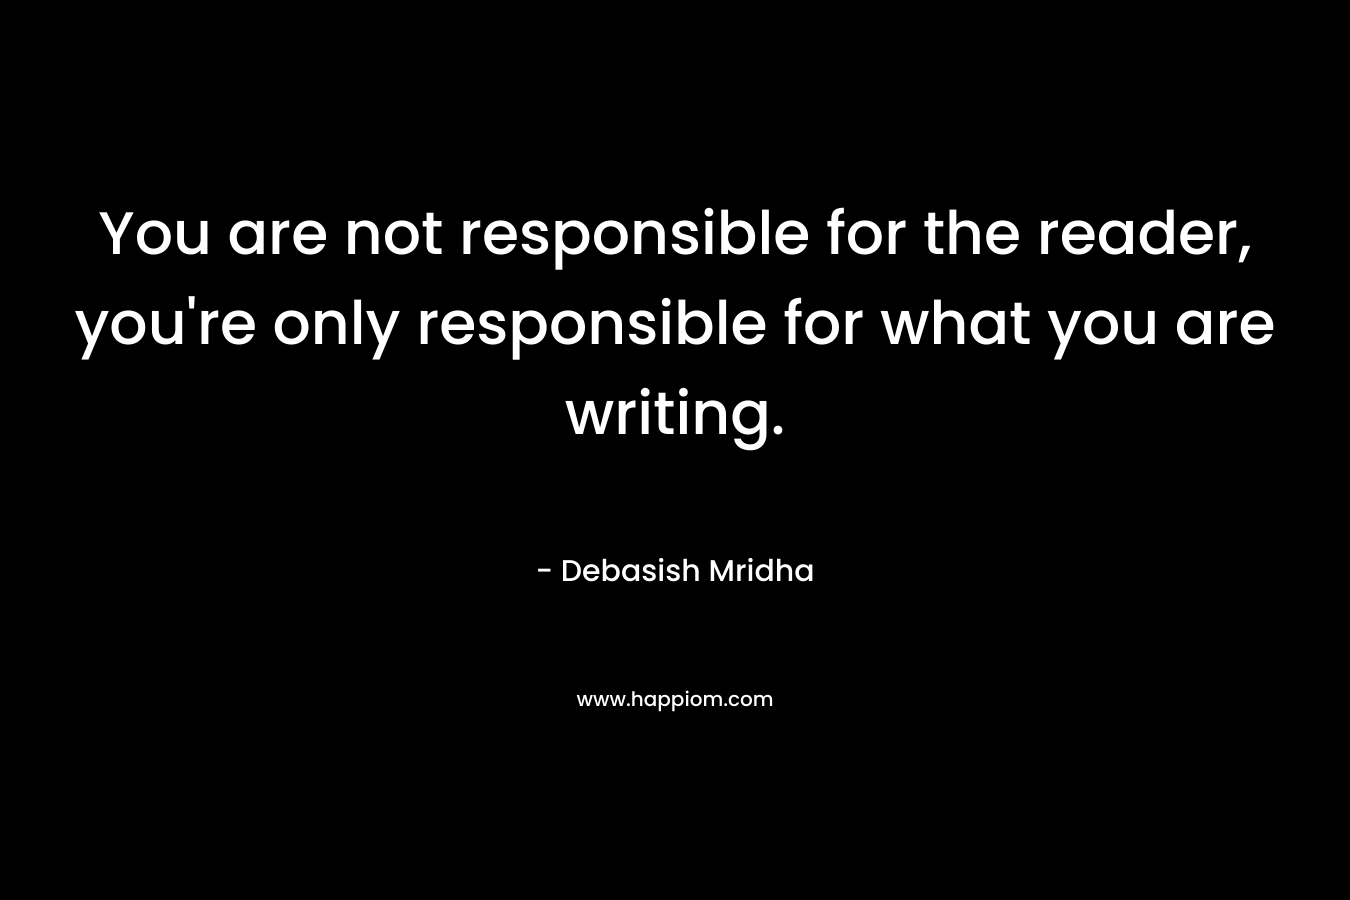 You are not responsible for the reader, you’re only responsible for what you are writing. – Debasish Mridha